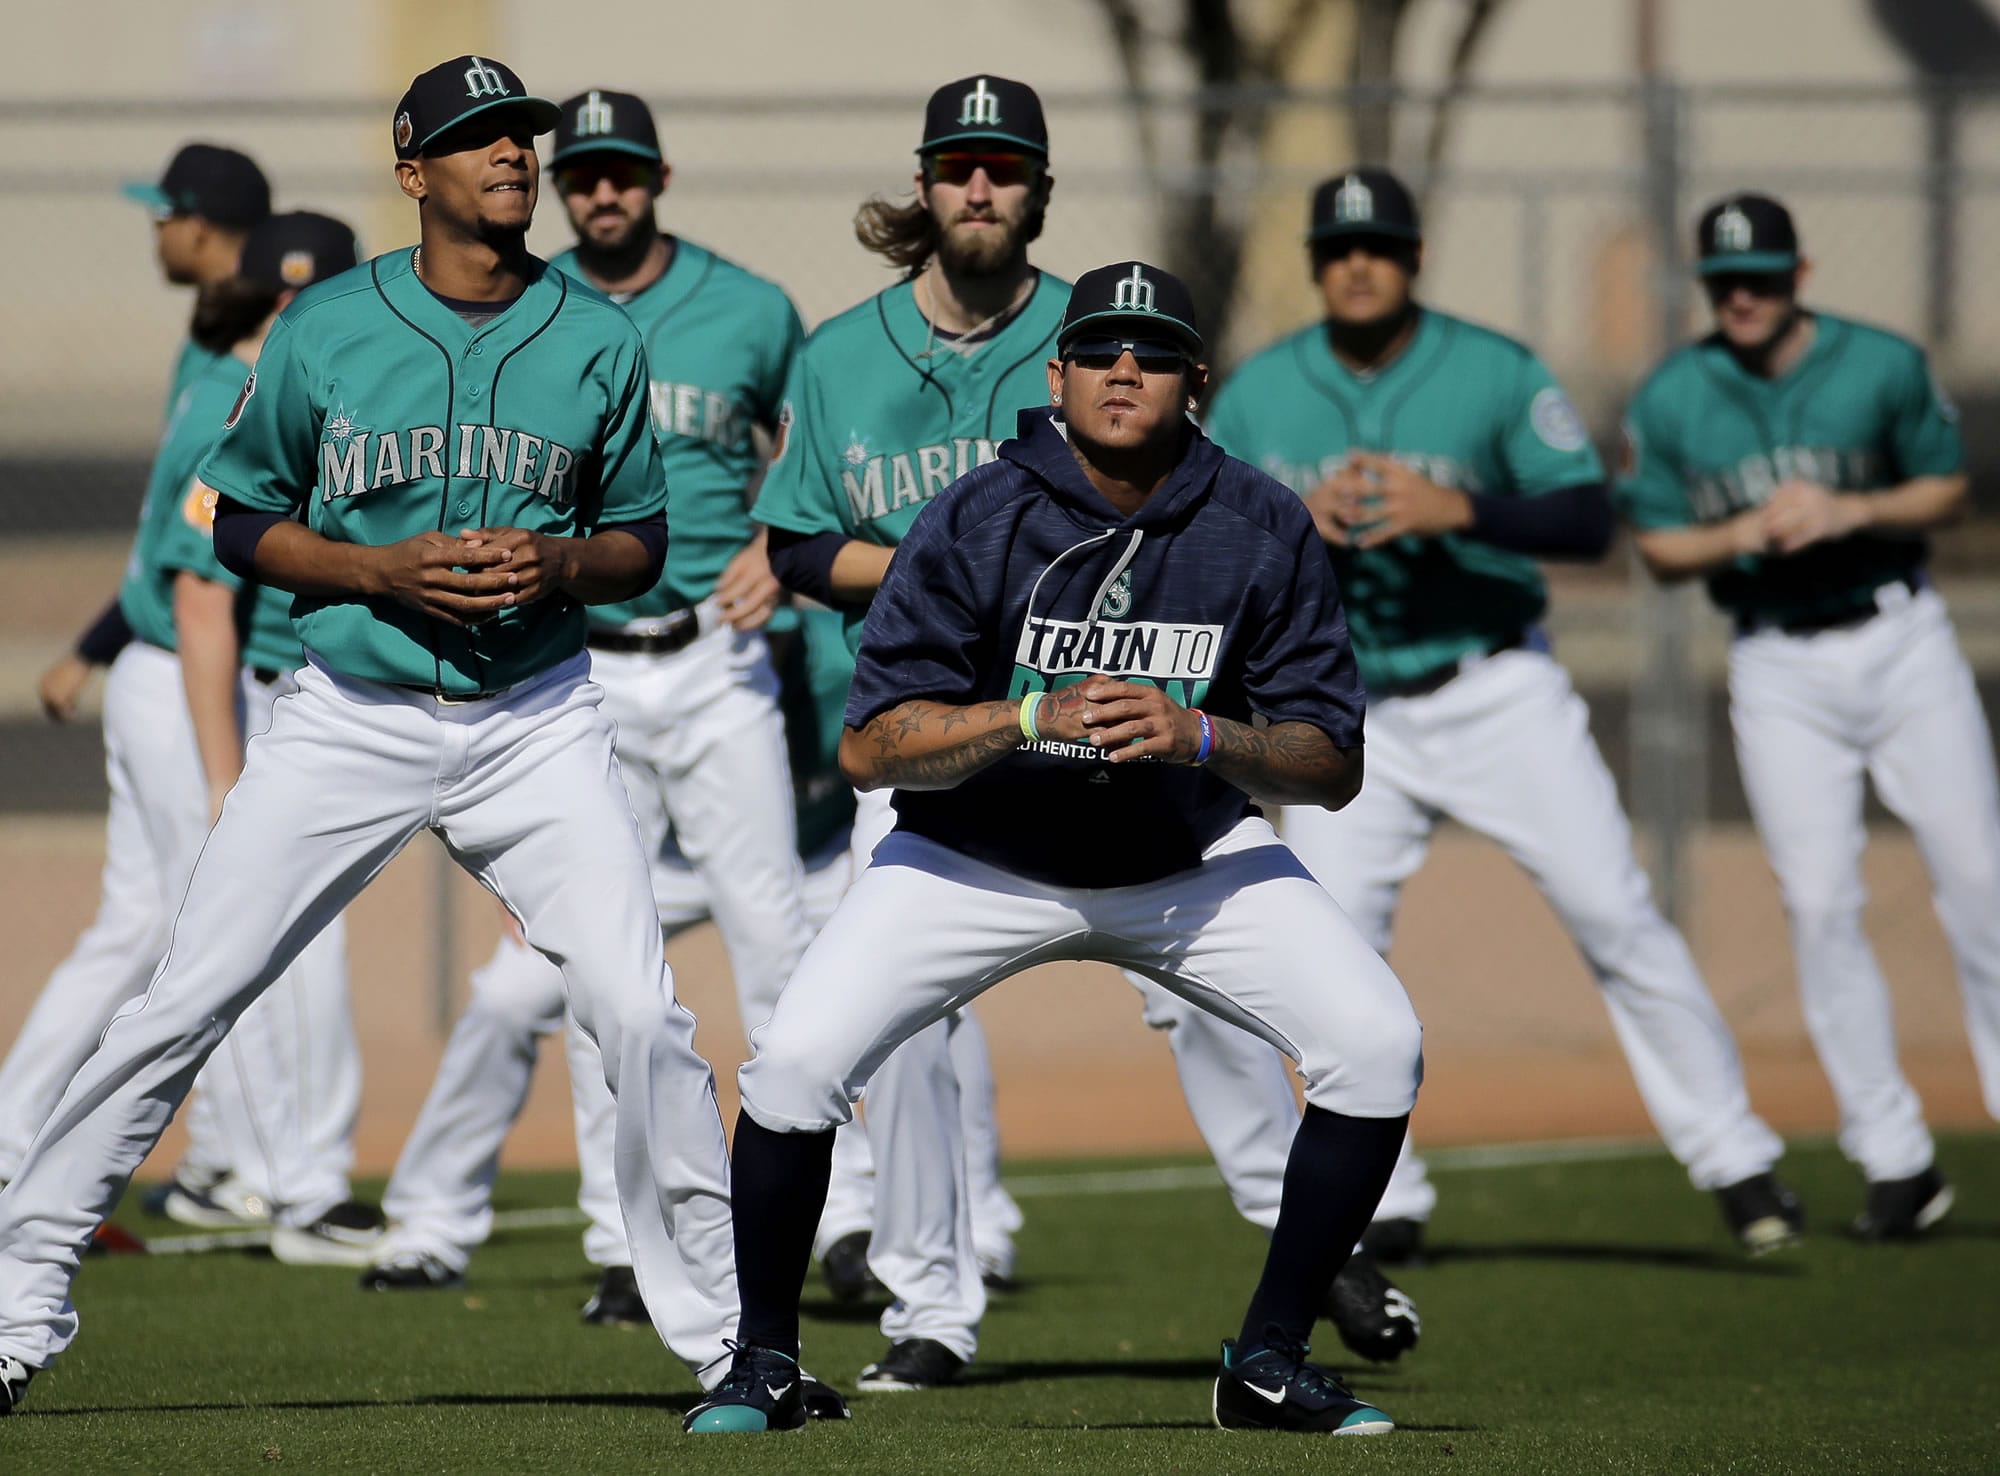 Seattle Mariners pitcher Felix Hernandez, front center, stretches with teammates participates during spring training baseball practice Wednesday, Feb. 15, 2017, in Peoria, Ariz.